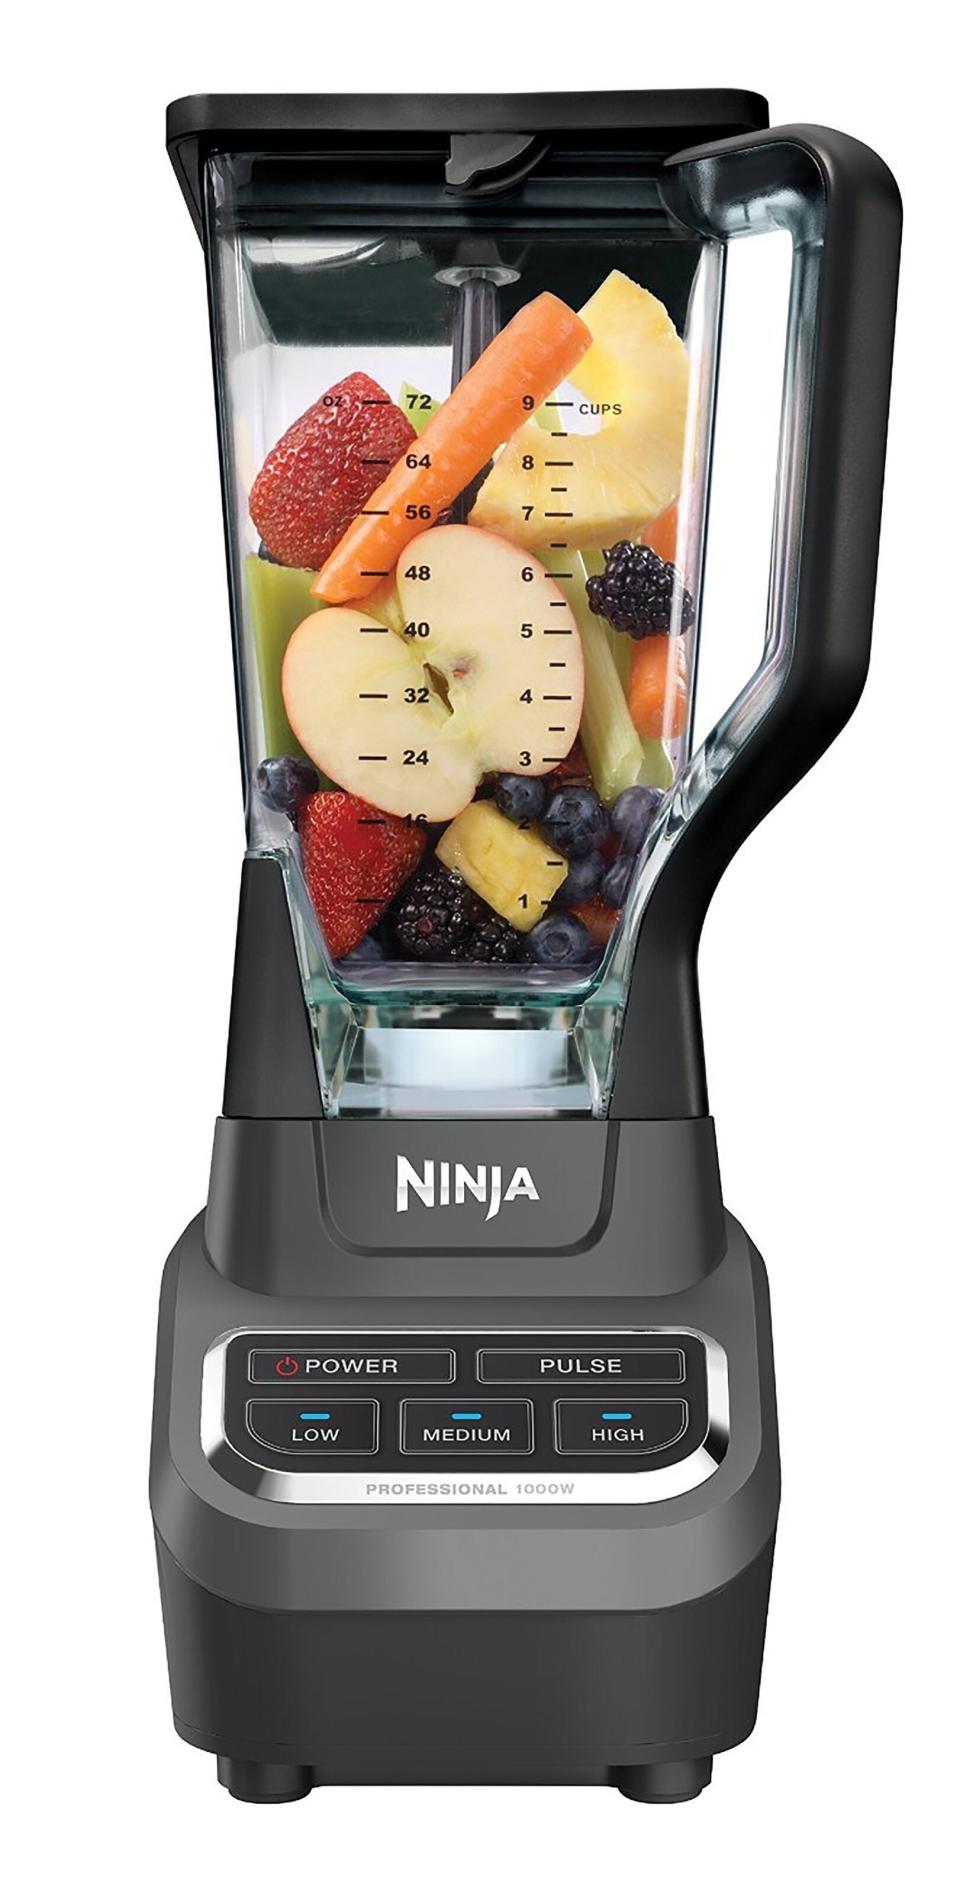 Blender filled with various fruits displaying measurement markings and buttons on the base for different blending options